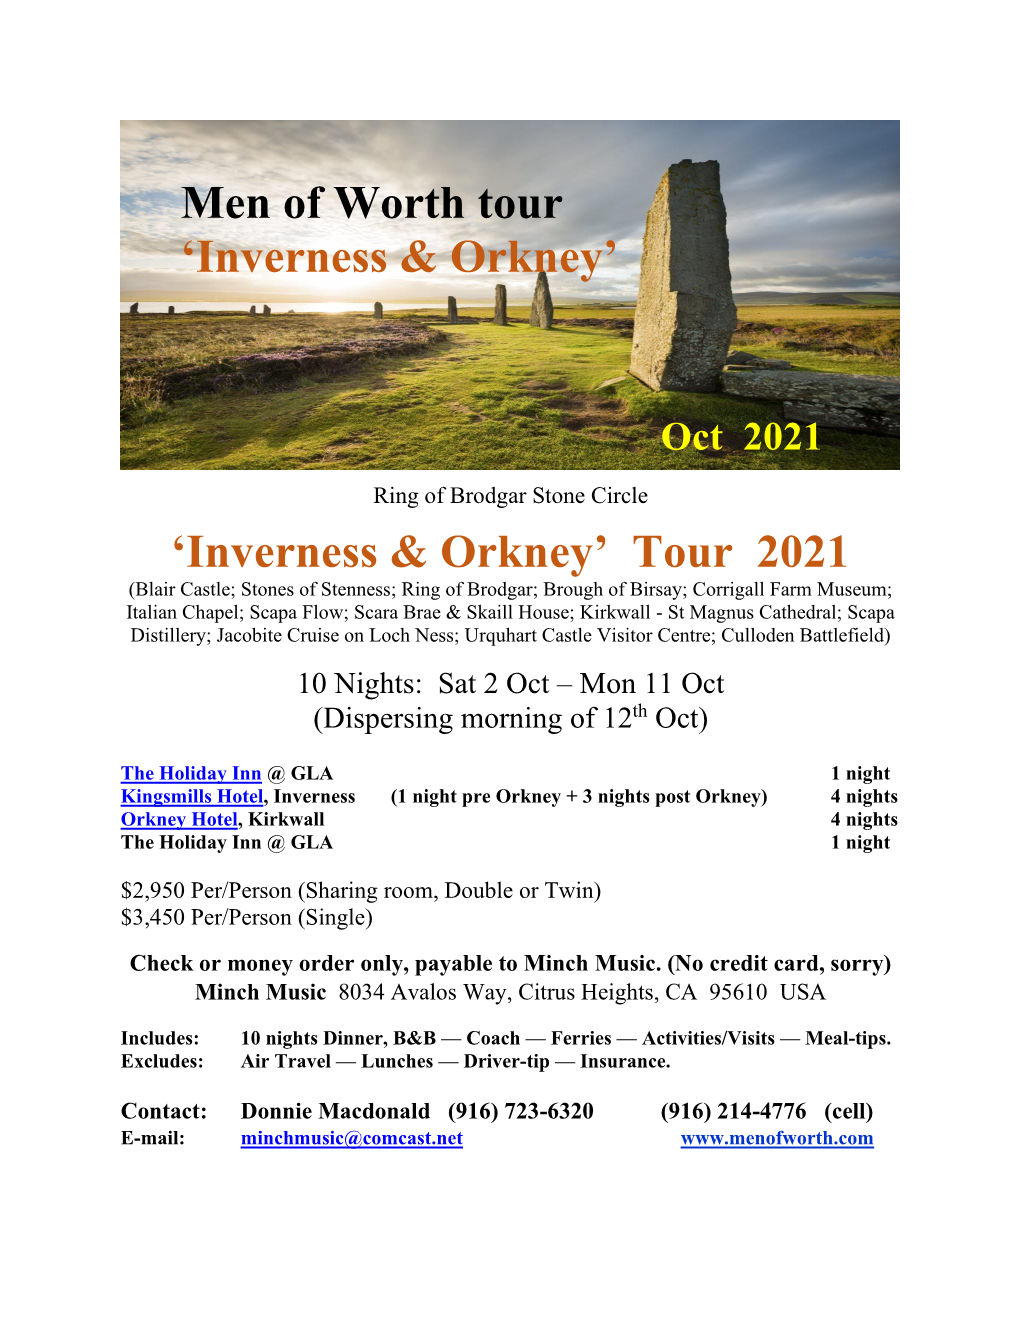 Men of Worth Tour 'Inverness & Orkney' 'Inverness & Orkney' Tour 2021